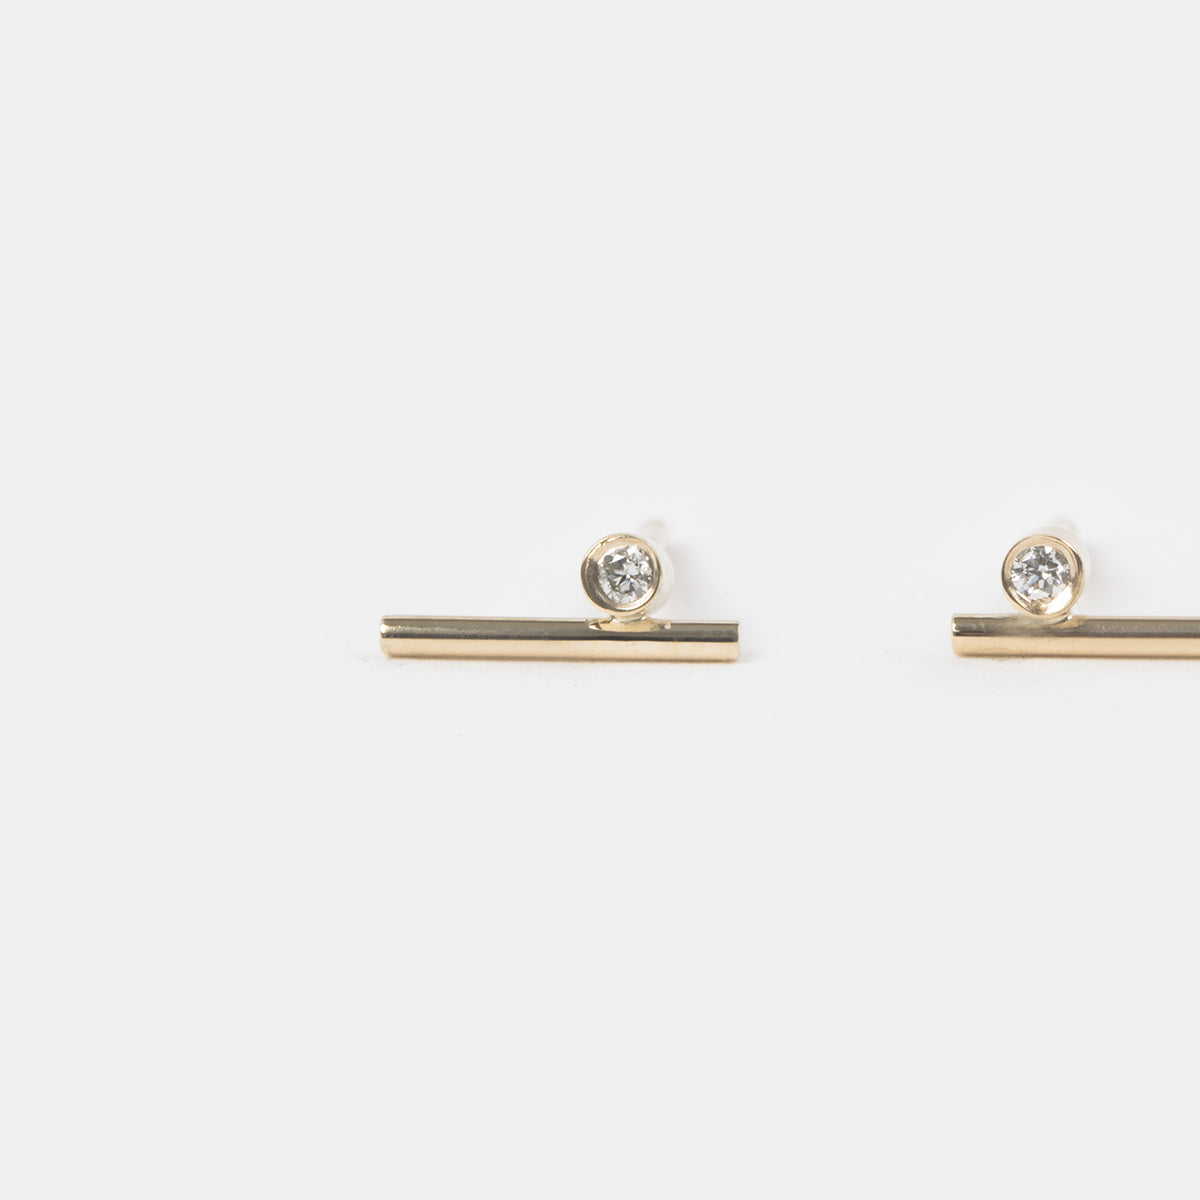 Livi Small Alternative Stud Earrings in 14k Yellow Gold set with White Diamonds By SHW Fine Jewelry NYC